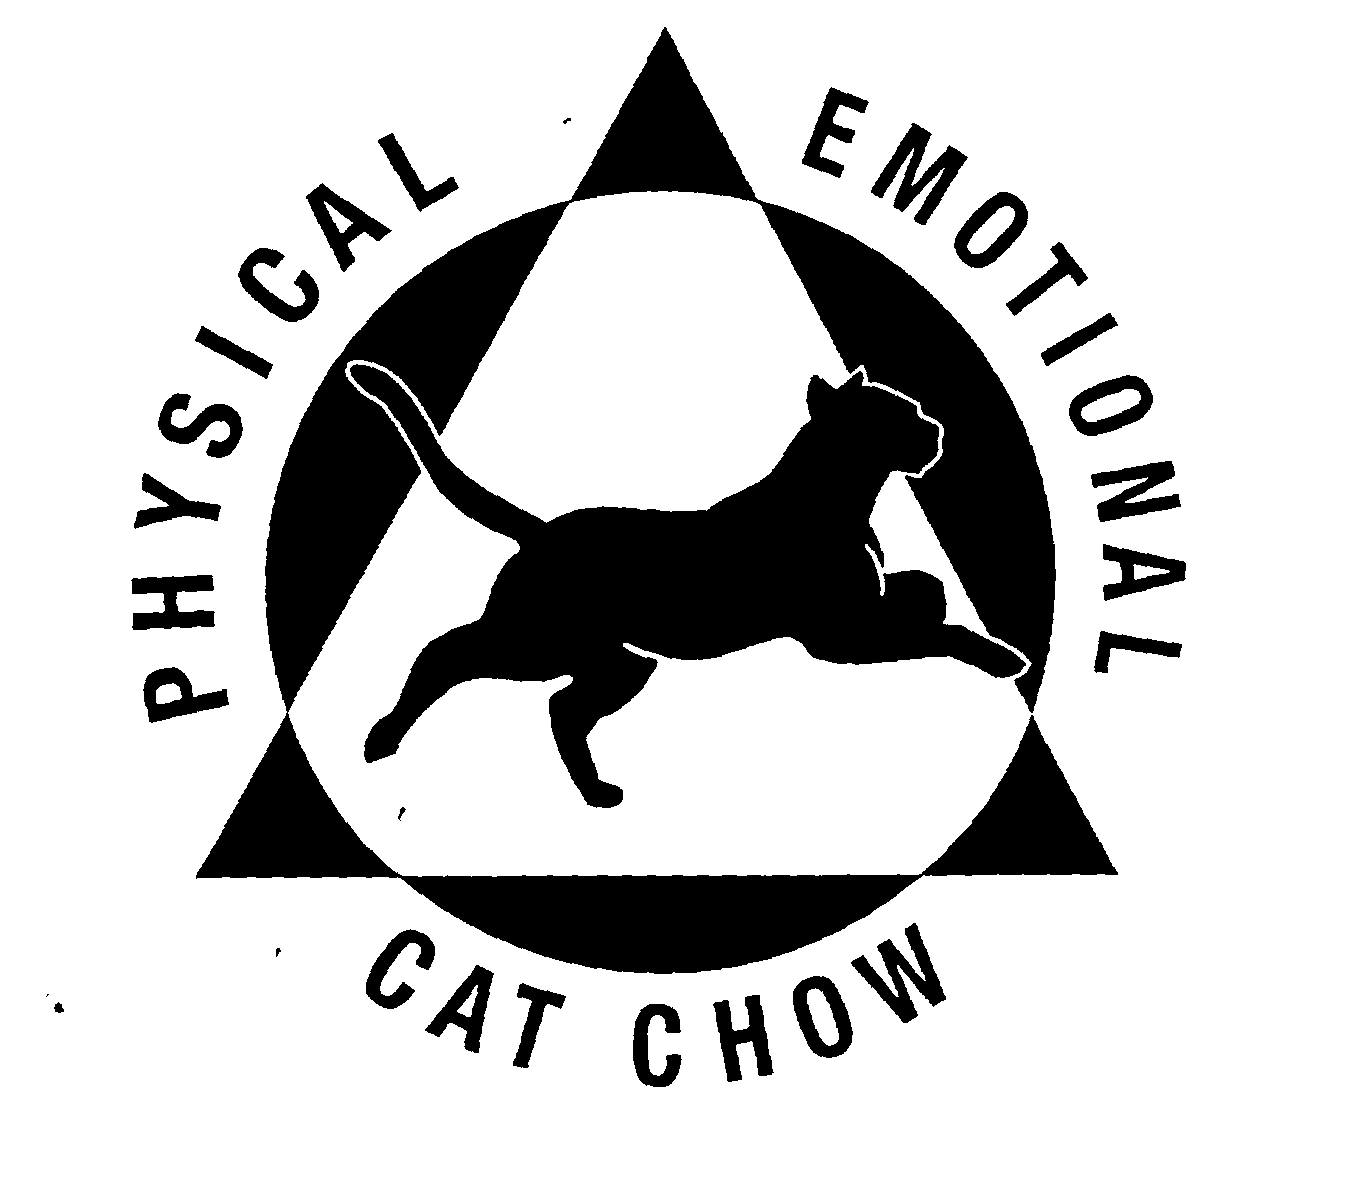  PHYSICAL EMOTIONAL CAT CHOW